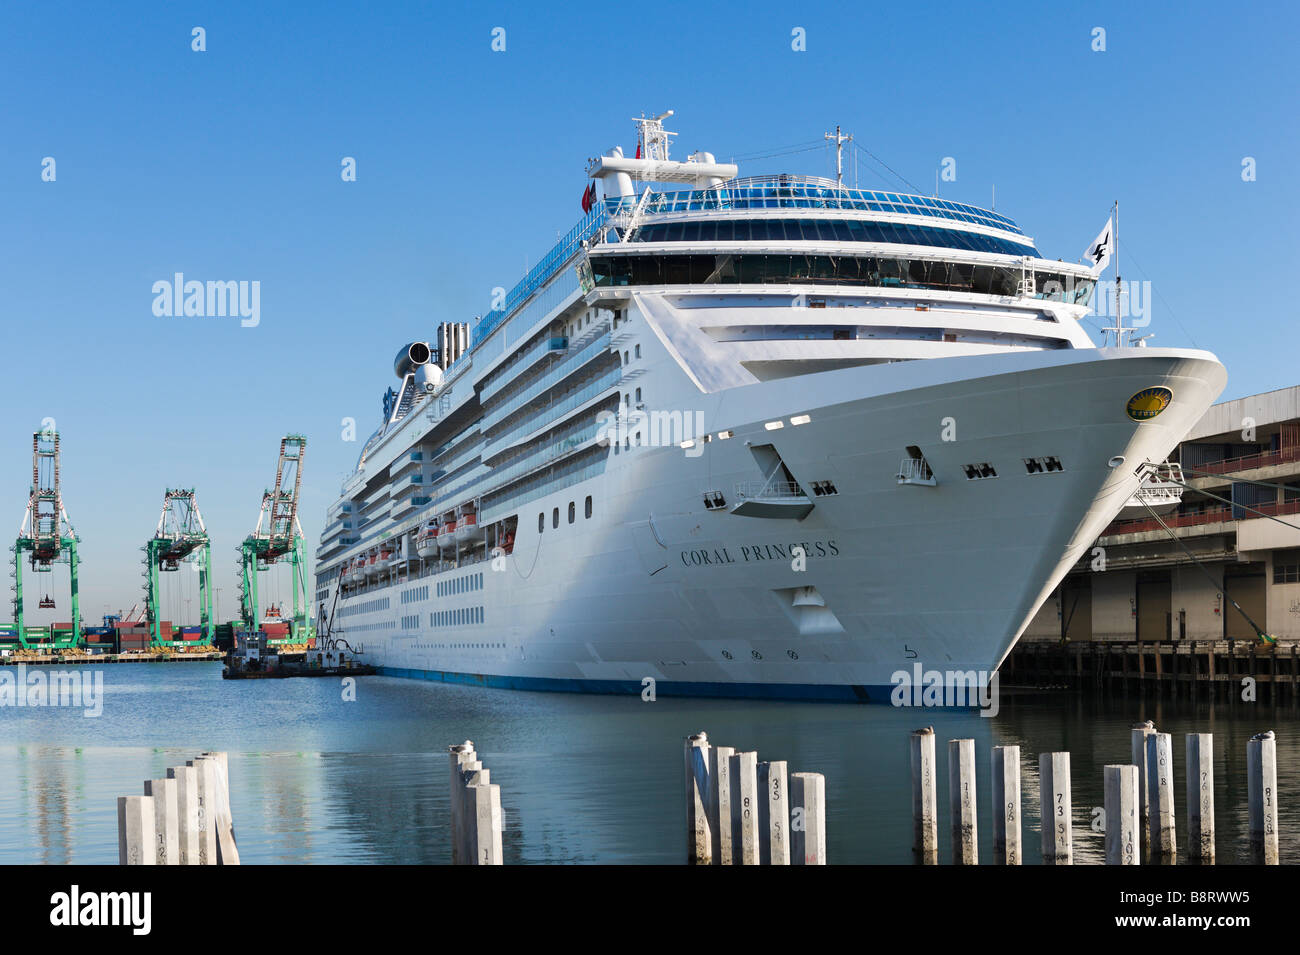 The cruise liner Coral Princess docked at the Cruise Terminal in the Port of Los Angeles, San Pedro, Los Angeles, California Stock Photo